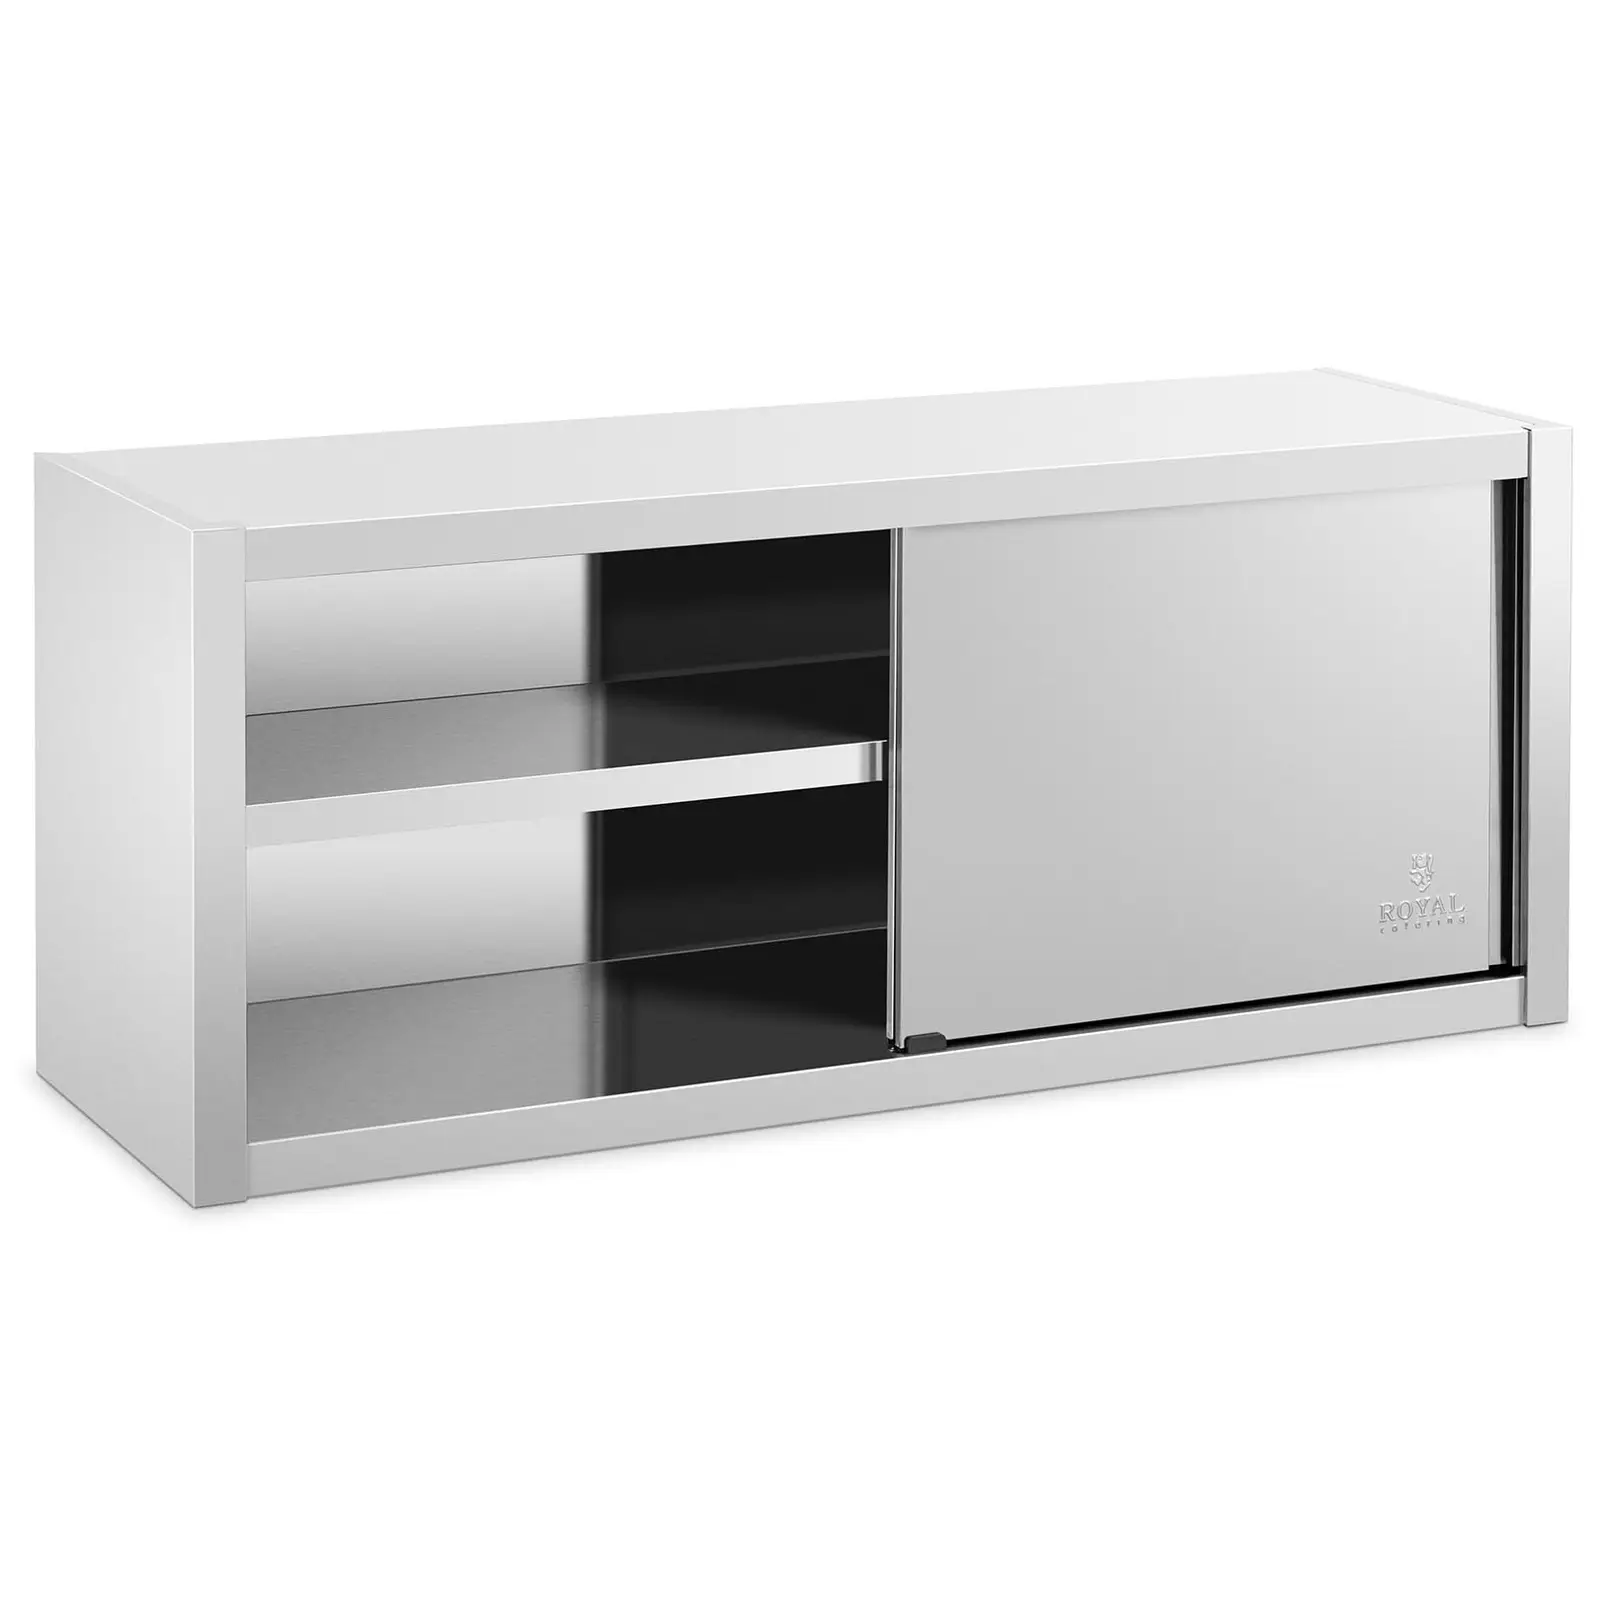 Factory second Stainless Steel Hanging Cabinet - 140 x 45 cm